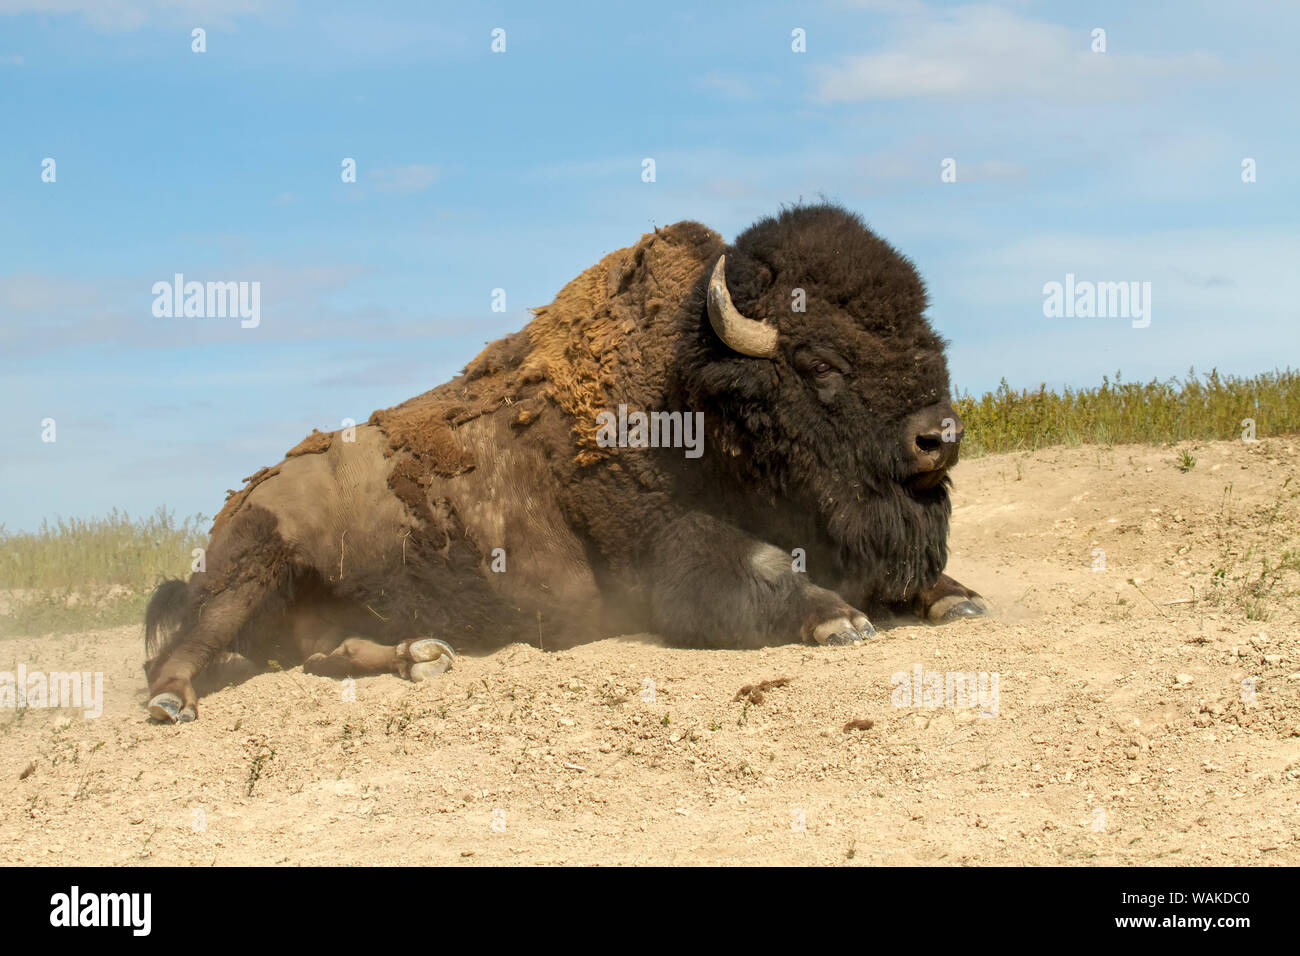 National Bison Range, Montana, USA. Bison starting to stand up in a dust wallow. Stock Photo